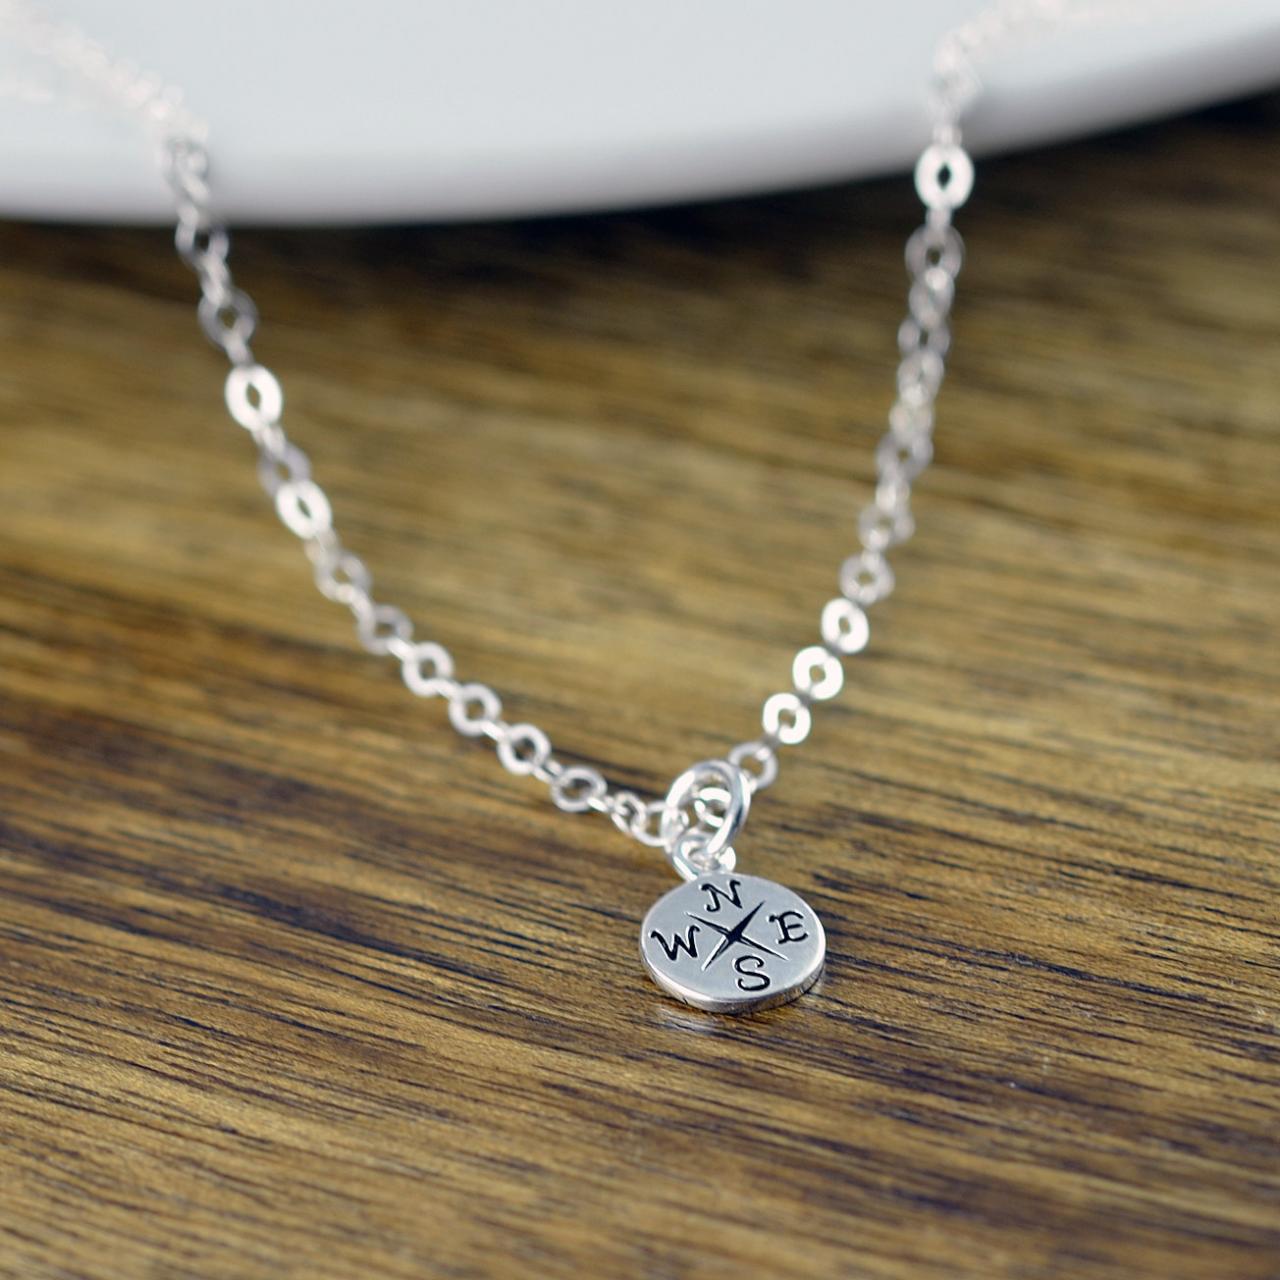 Sterling Silver Compass Necklace - Tiny Compass Charm - Wanderlust Necklace - Compass Necklace - Compass Jewelry - Friend Gift